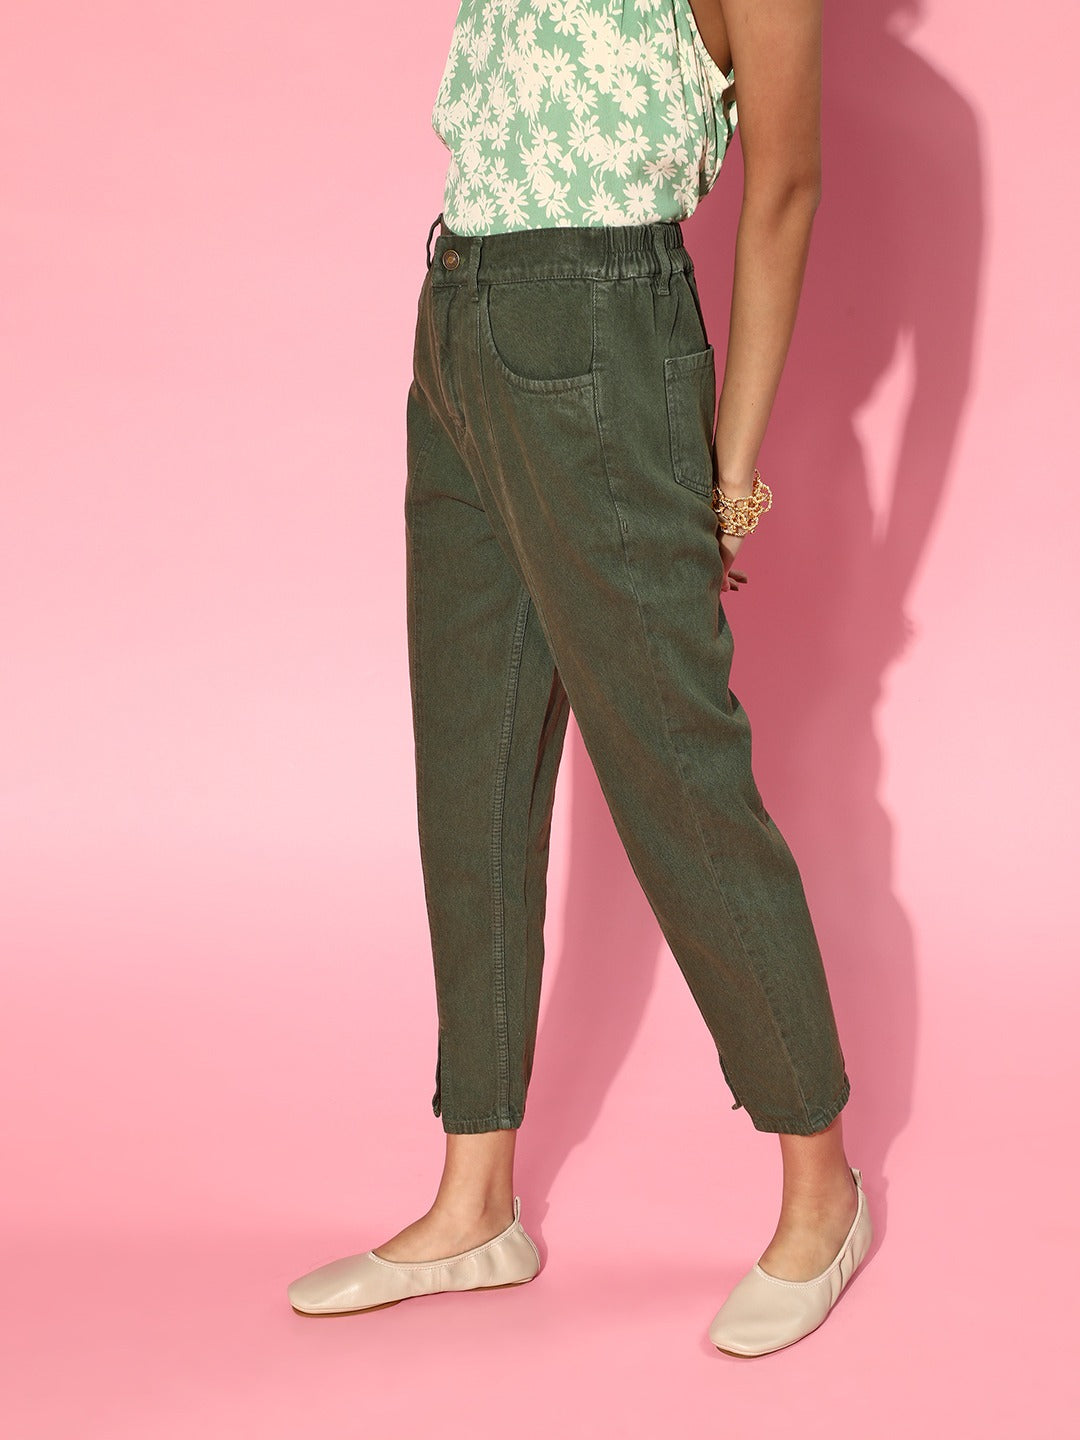 Buy FAB QUEENS Women's Cotton Flex Straight Casual Trouser Pant for Women  Slim Fit Pants for Kurtis Bottom Wear Bottle Green at Amazon.in